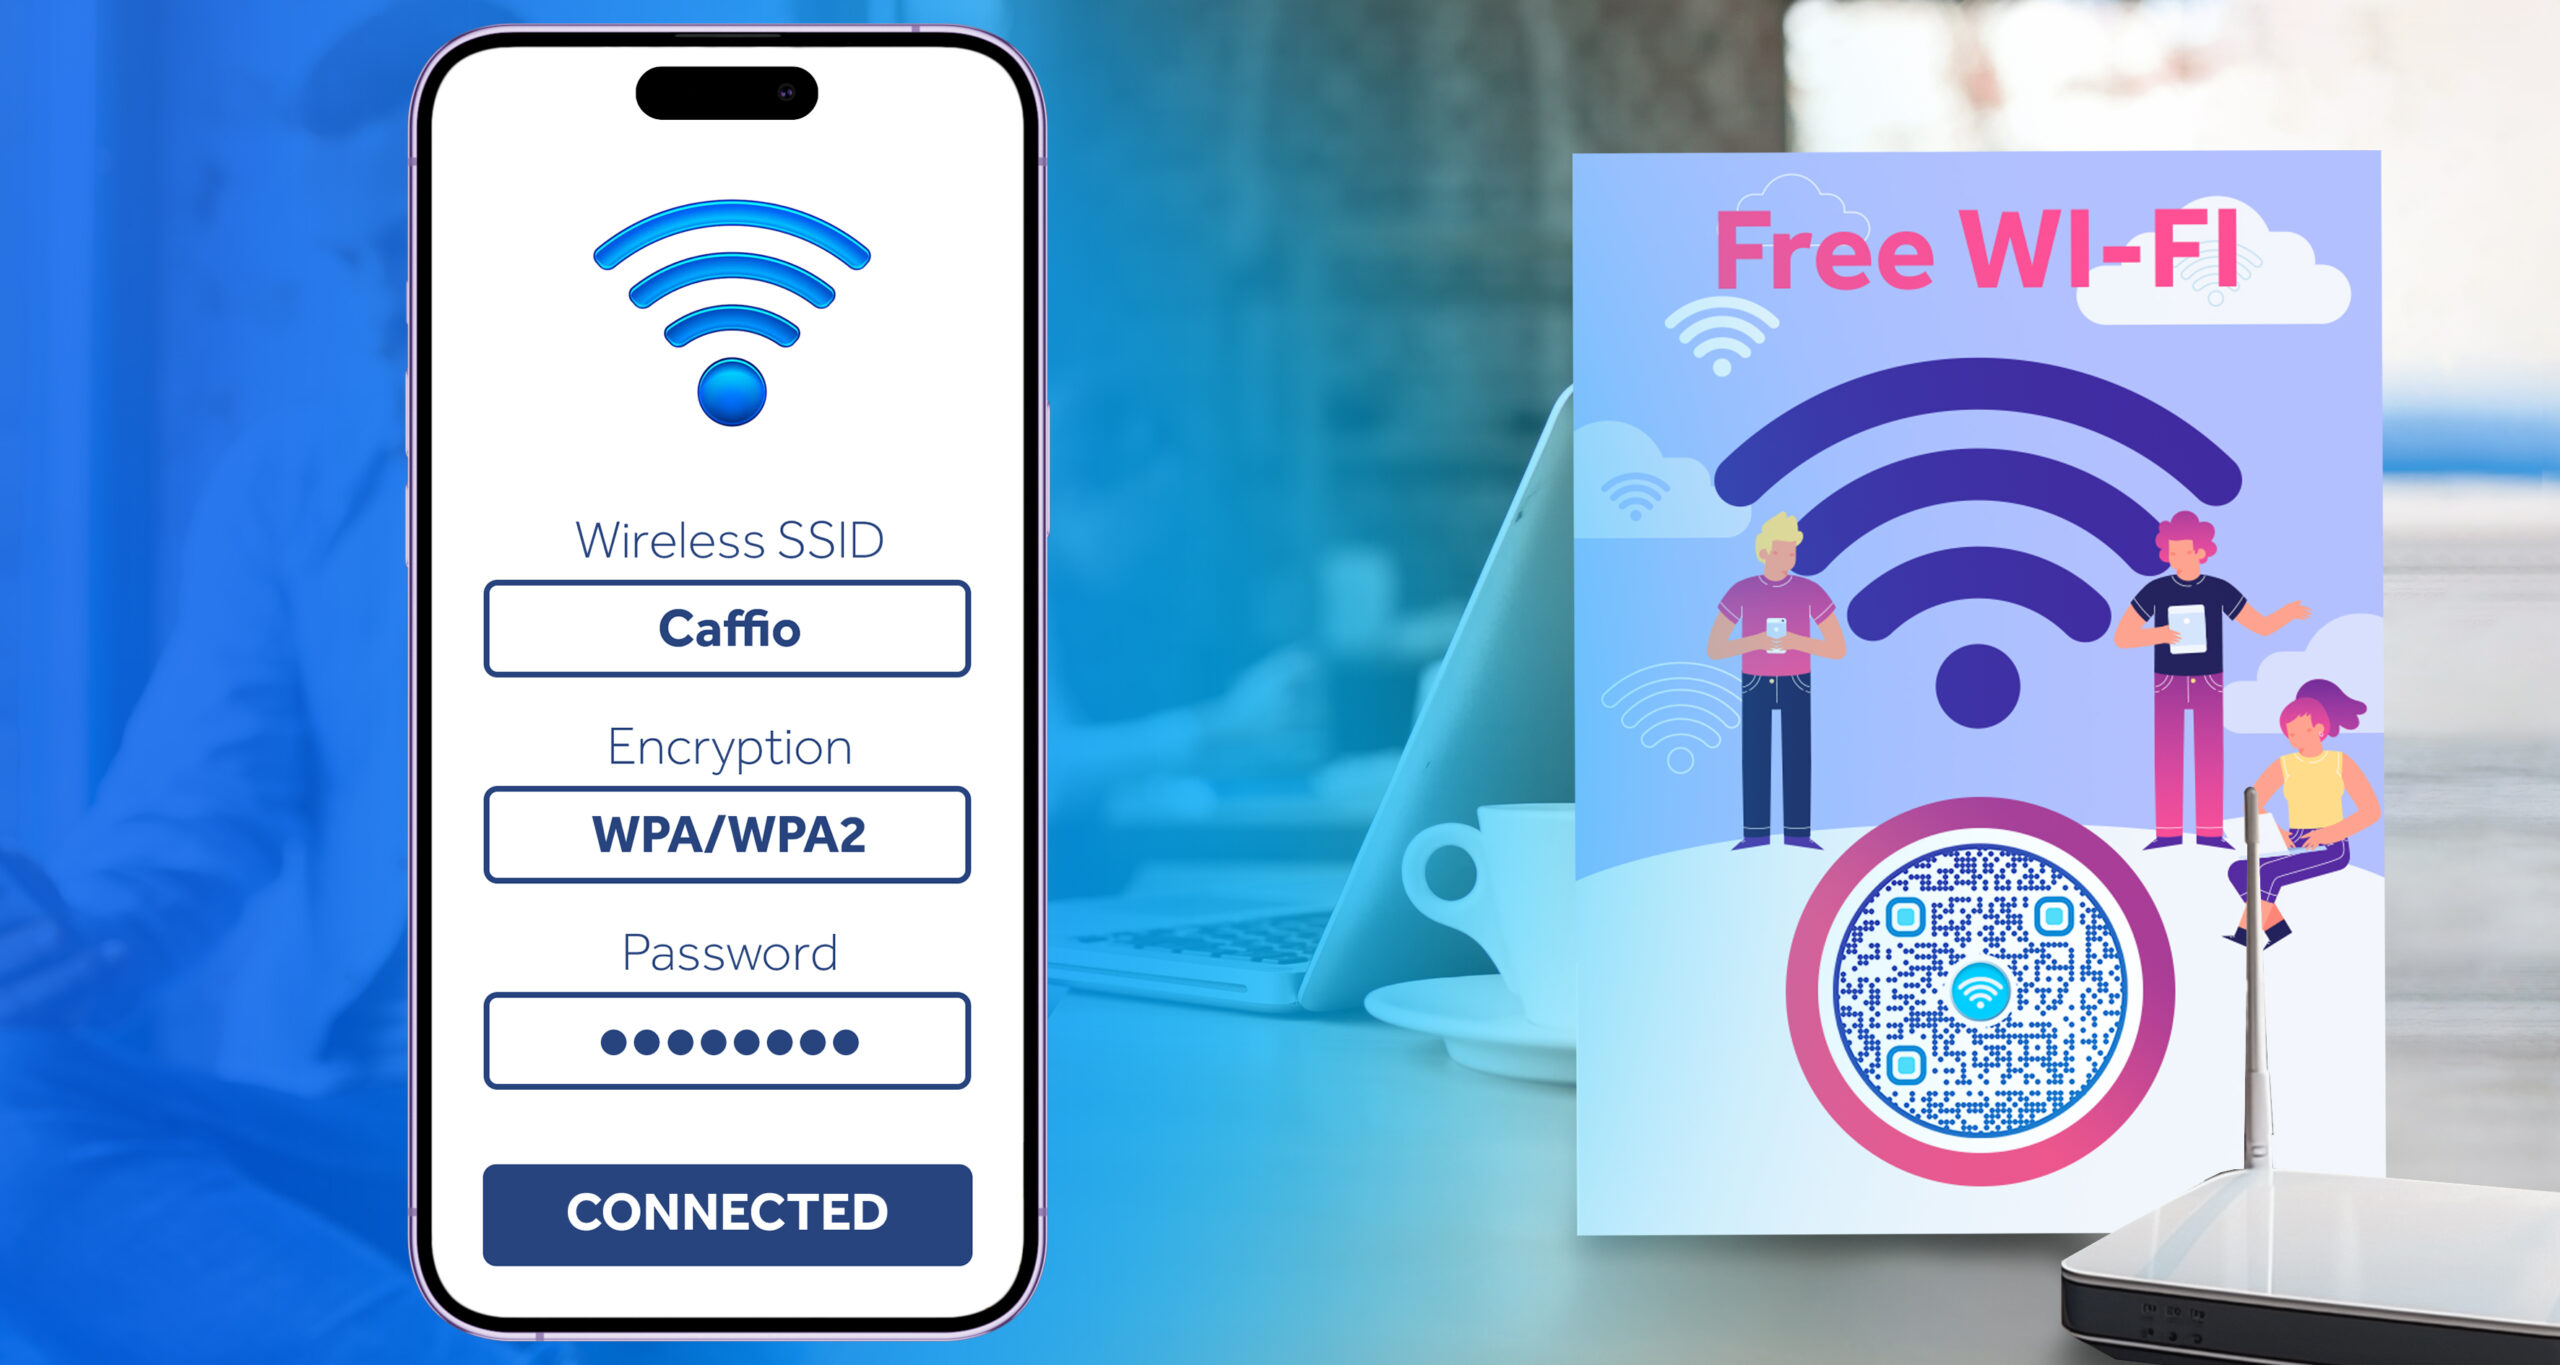 Illustration showing how to use Pageloot’s QR code generator to scan WiFi passwords and connect to WiFi networks via QR codes